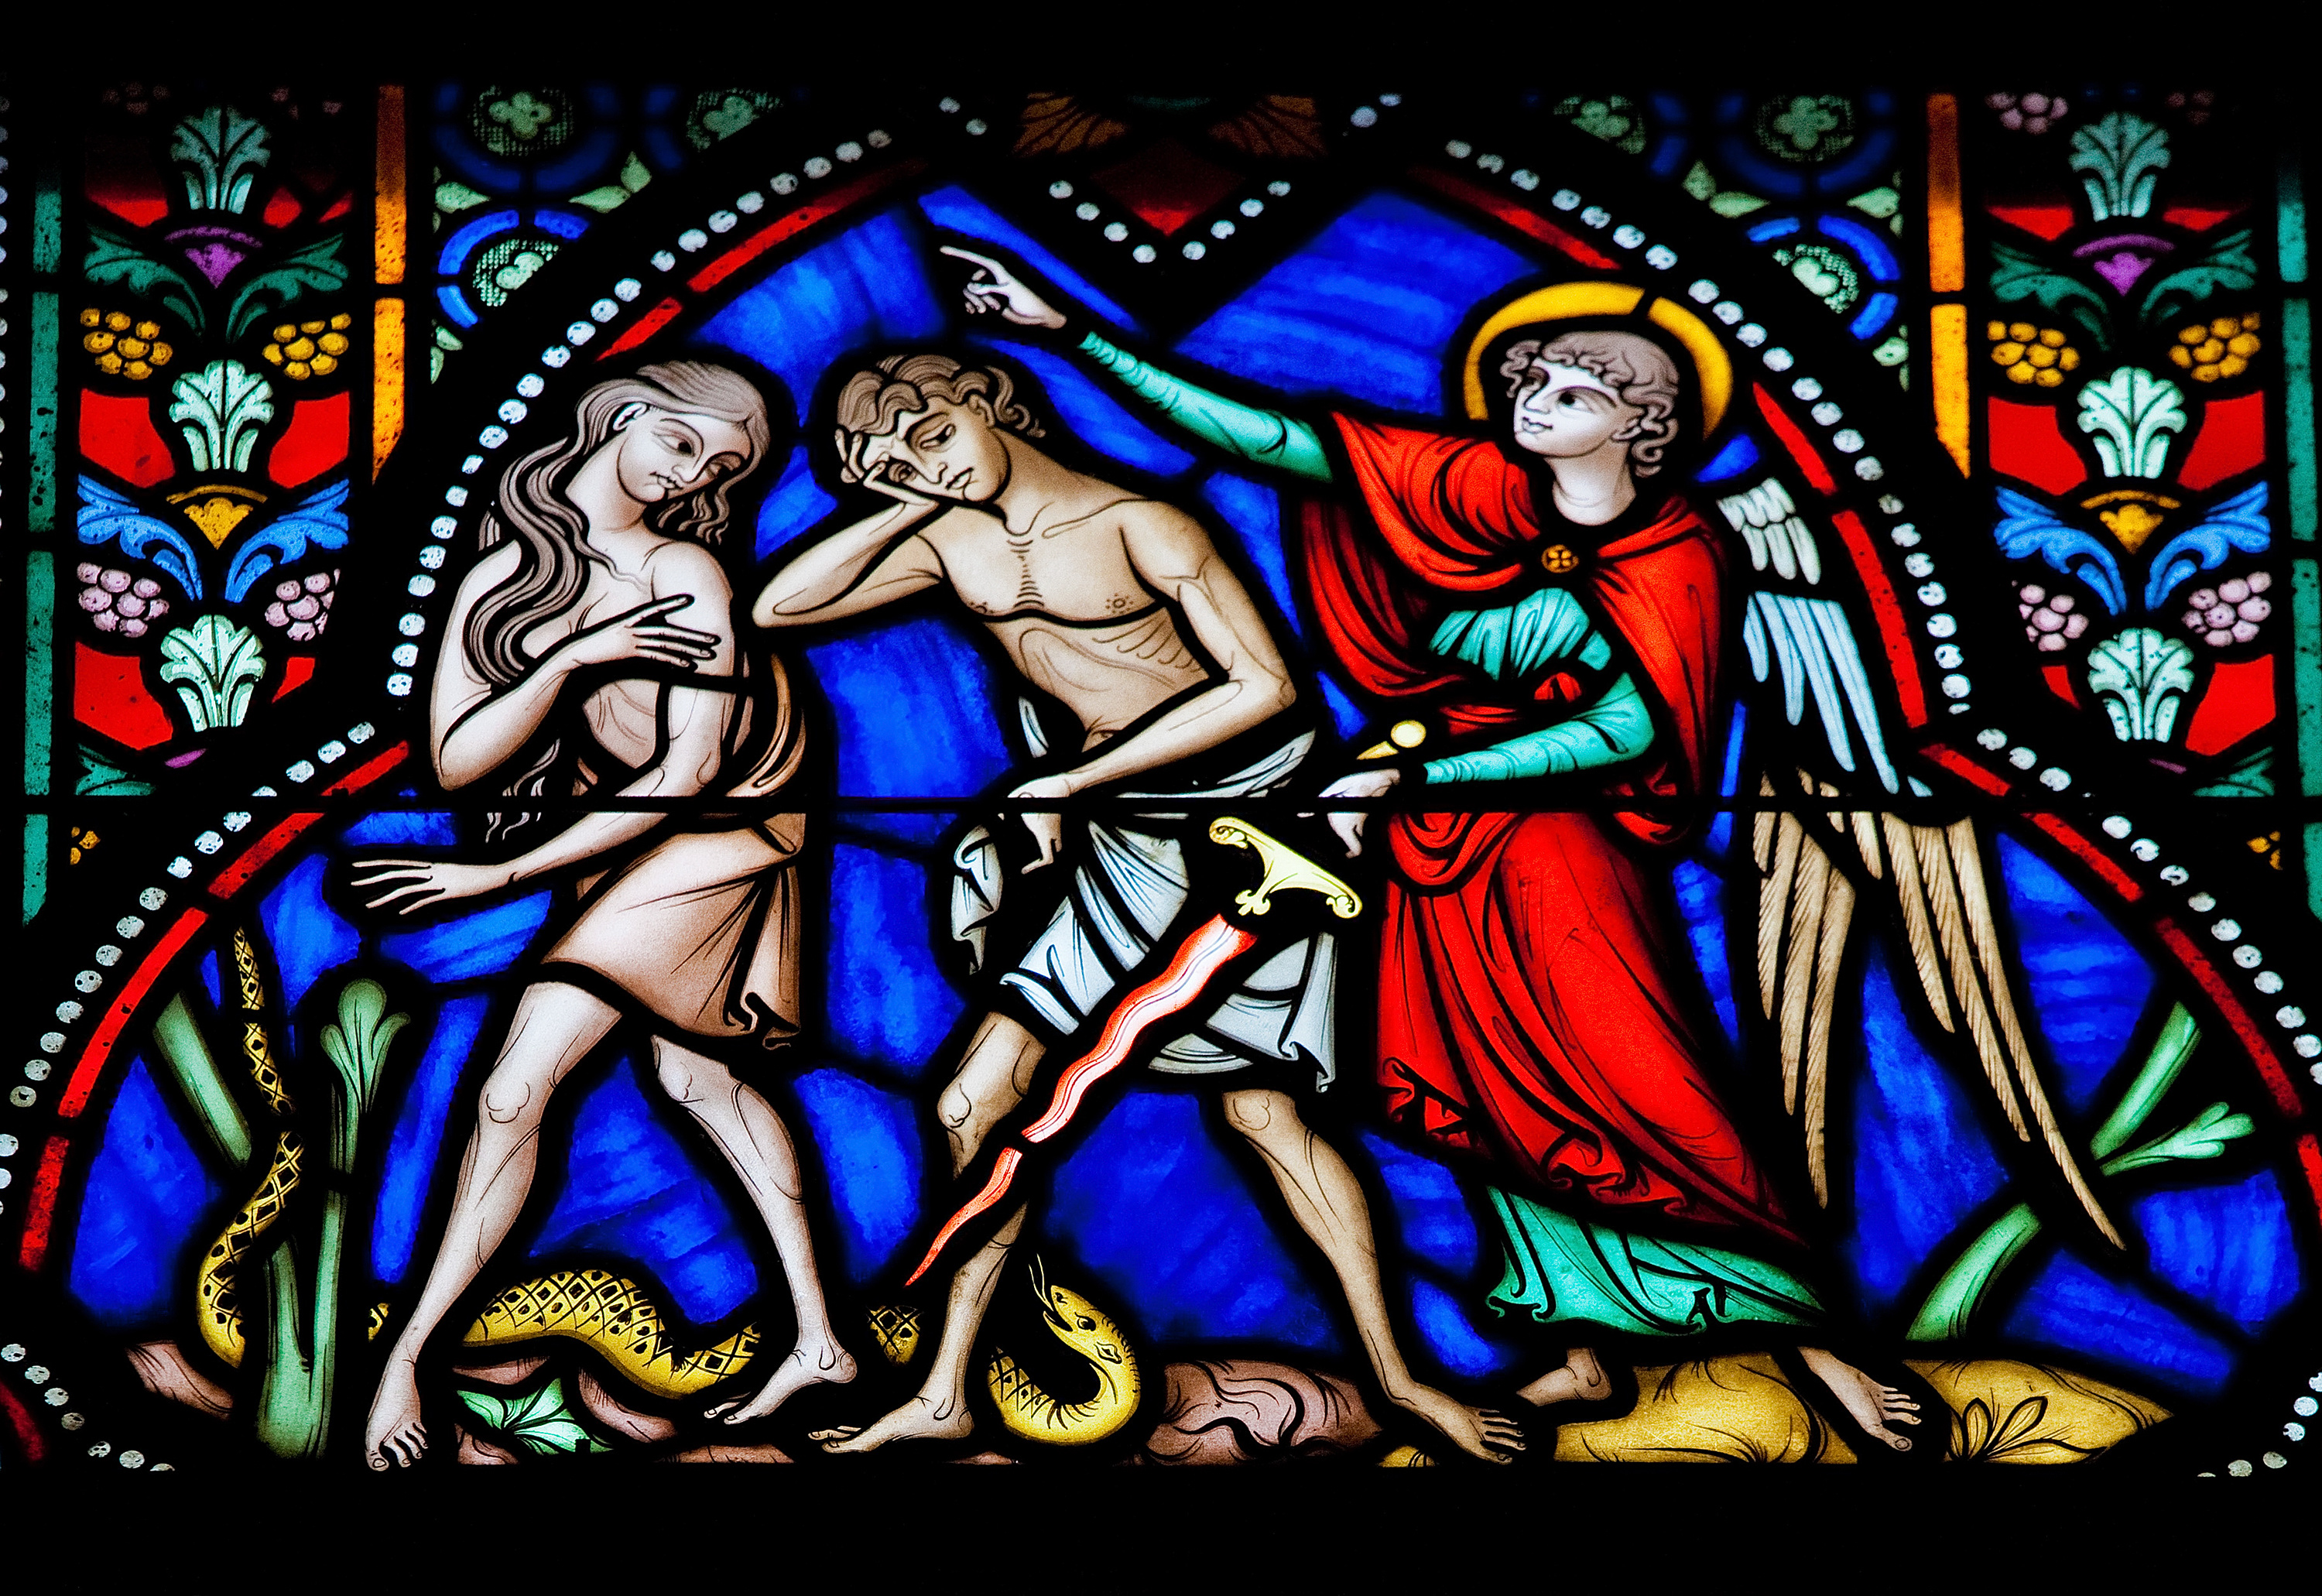 “The Sinners are Expelled from Paradise” stained glass panel from Auxerre Cathedral